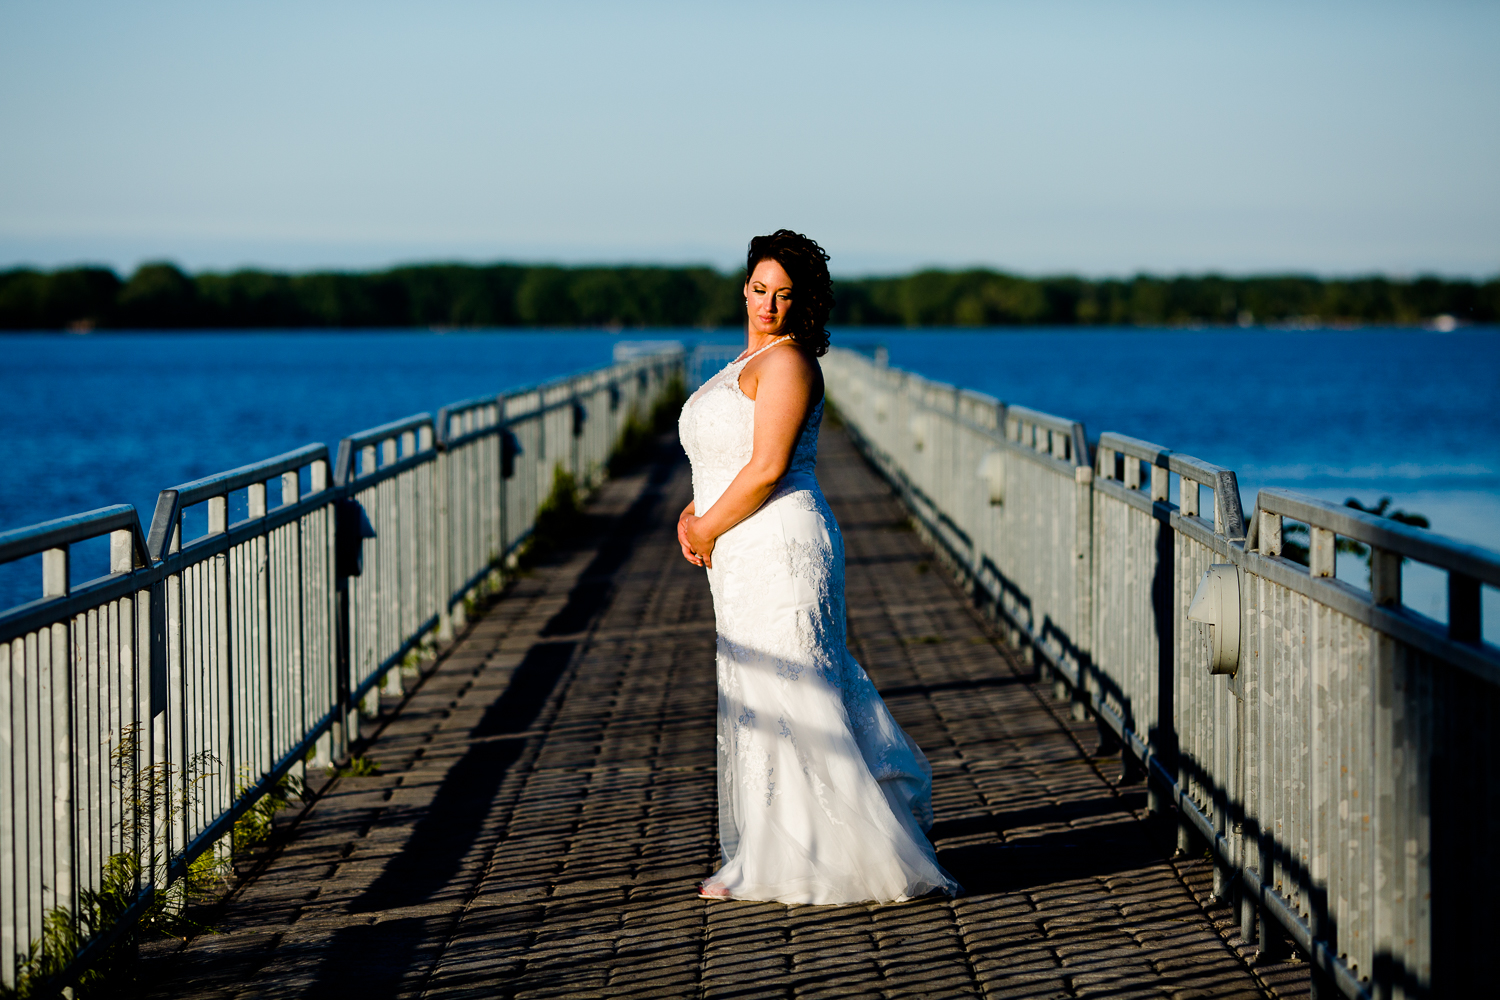  A bride in a white wedding dress stands in the center of a pier at sunset. The blue lake surrounds the pier. She looks over her shoulder. 